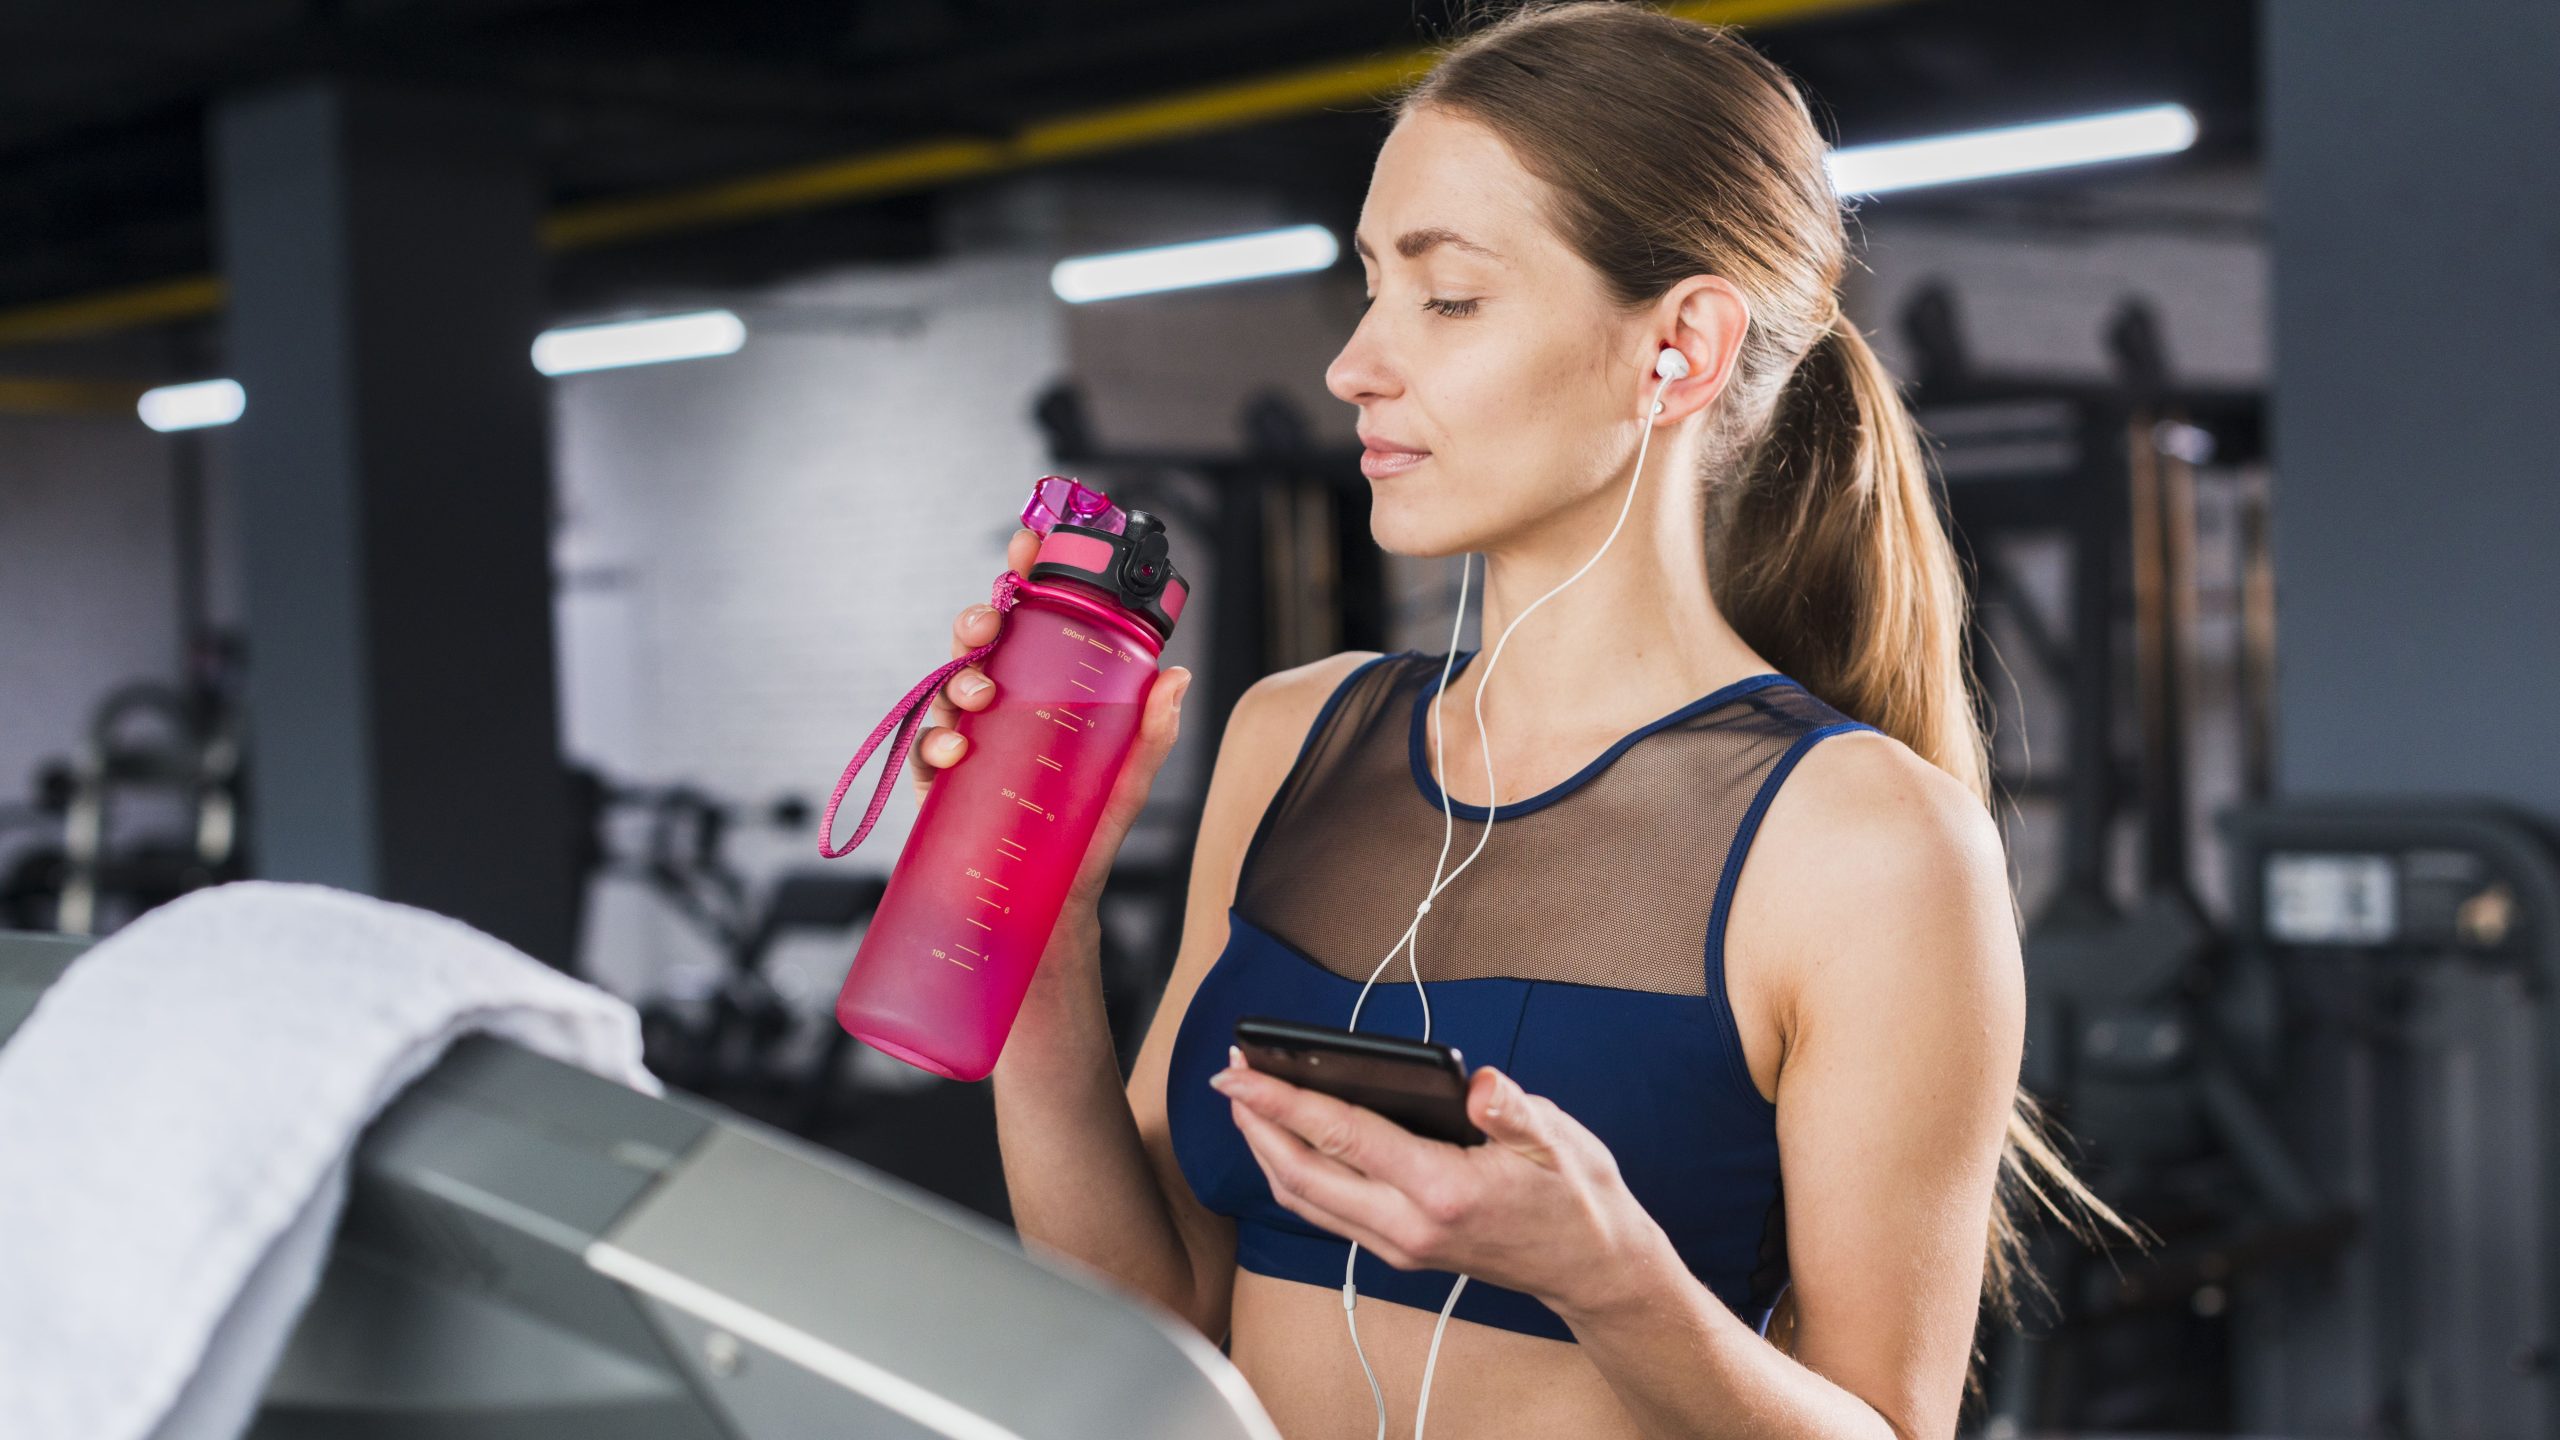 The most interesting gadgets for a physically active woman